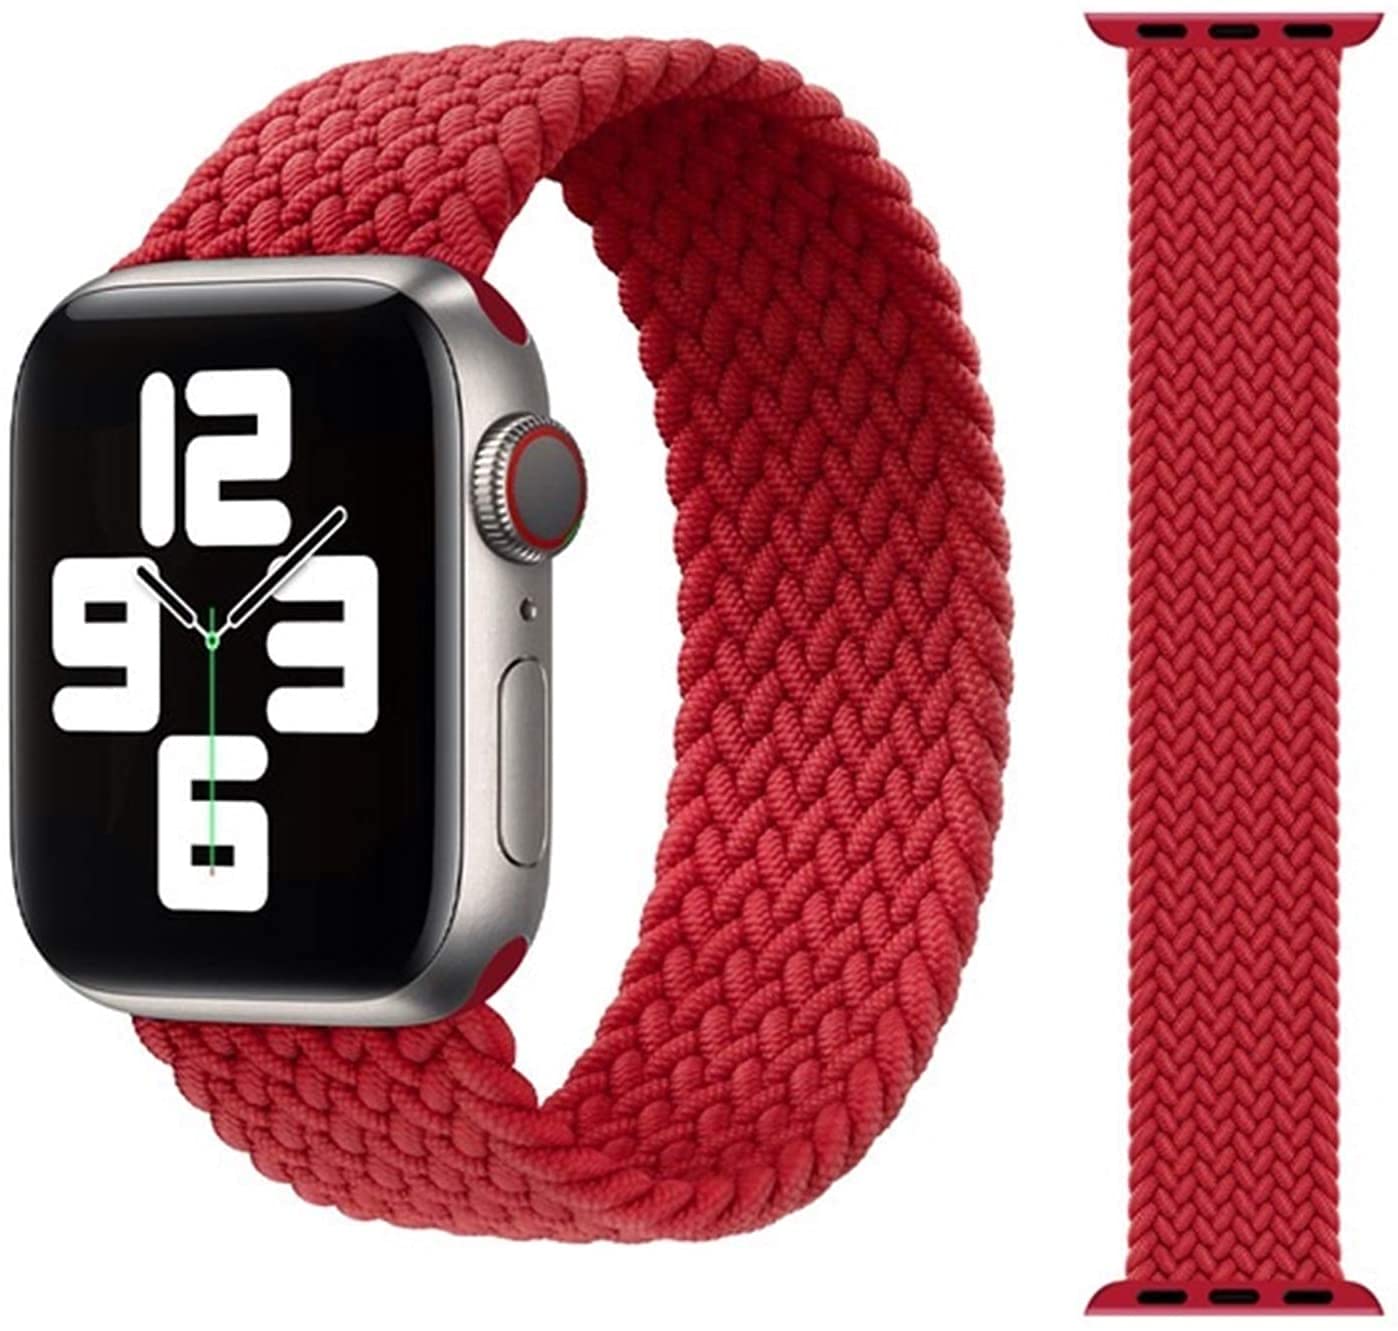 Braided Solo Loop Strap Compatible with Apple Watch Band 44mm/42mm, Soft Stretchable Sport 